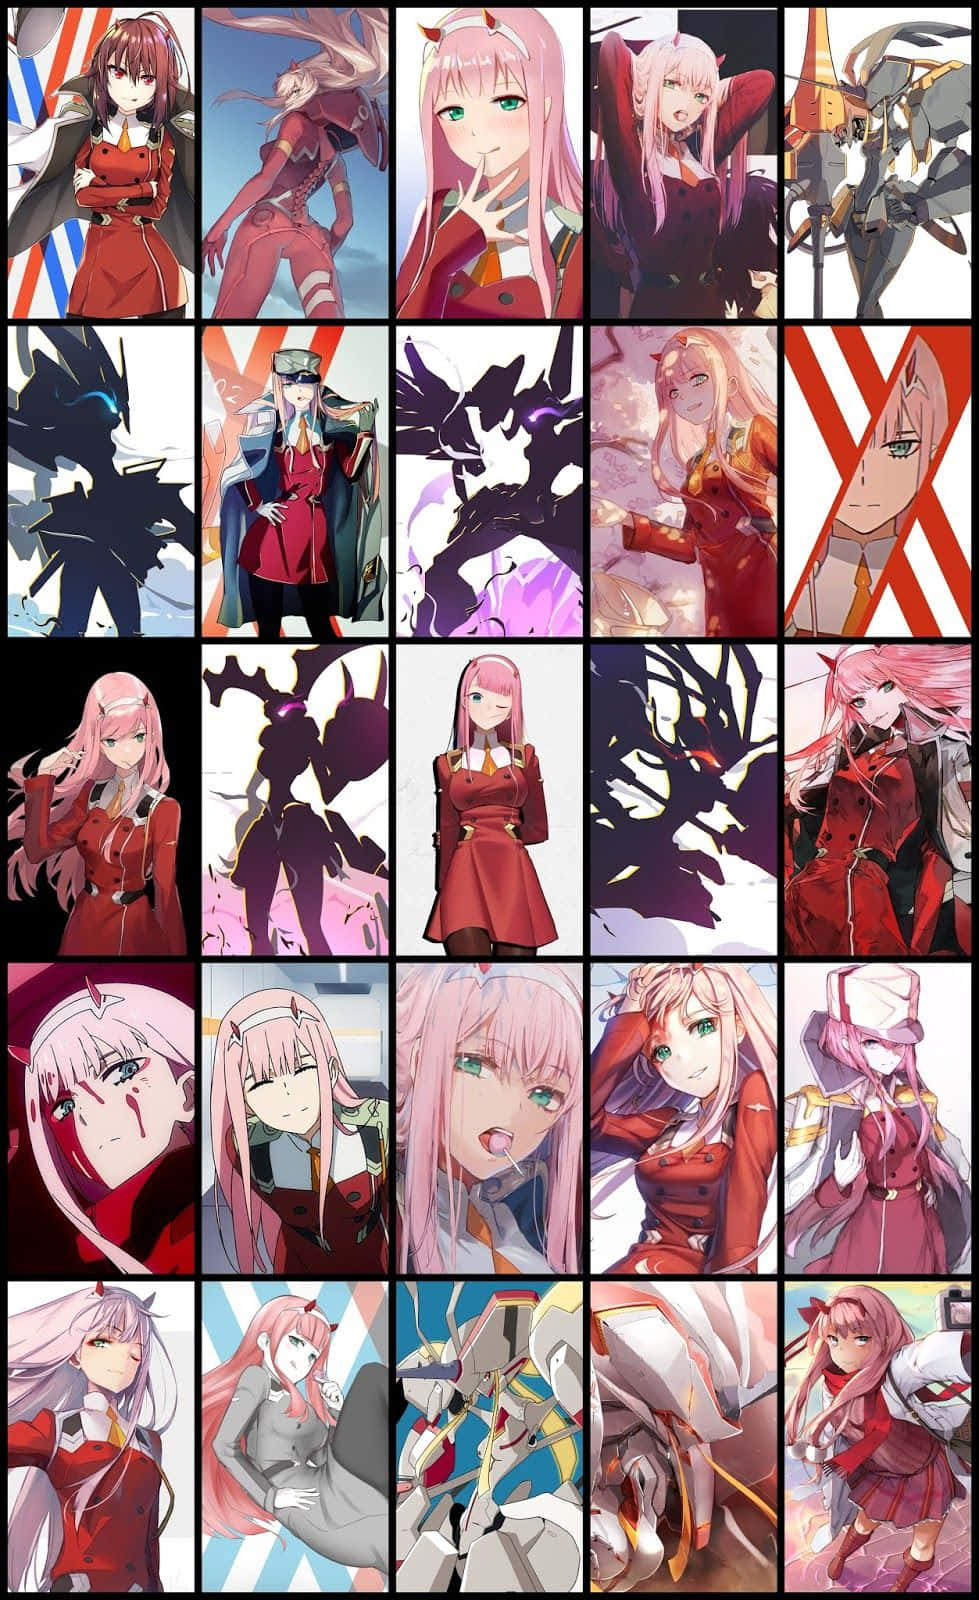 A nostalgic classic - phone inspired by Darling in The Franxx Wallpaper